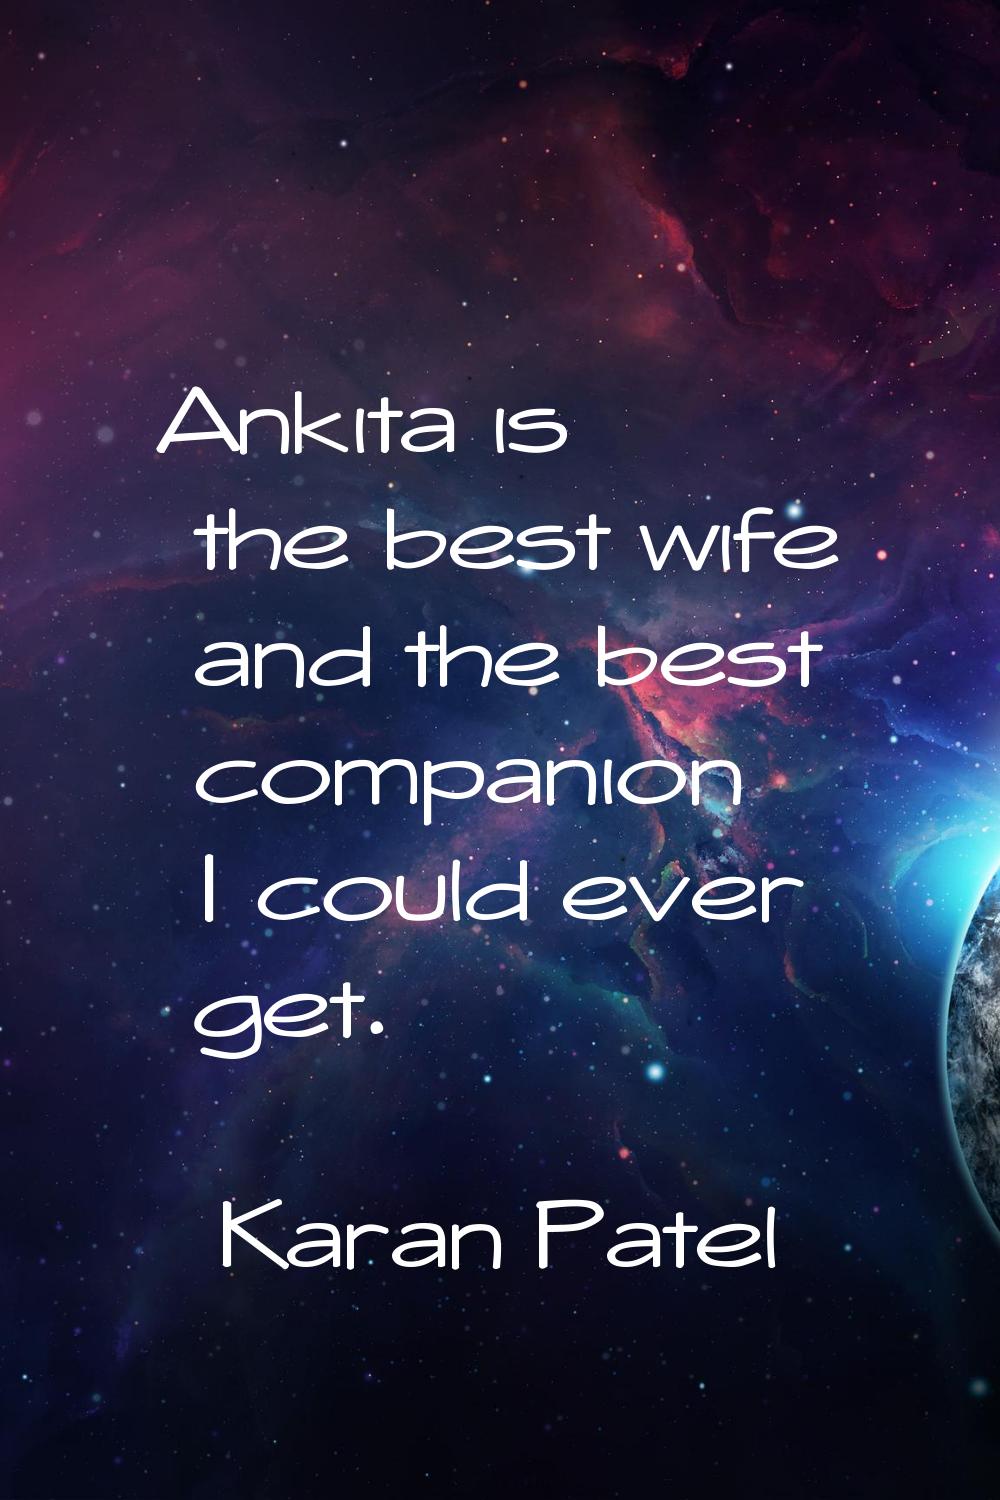 Ankita is the best wife and the best companion I could ever get.